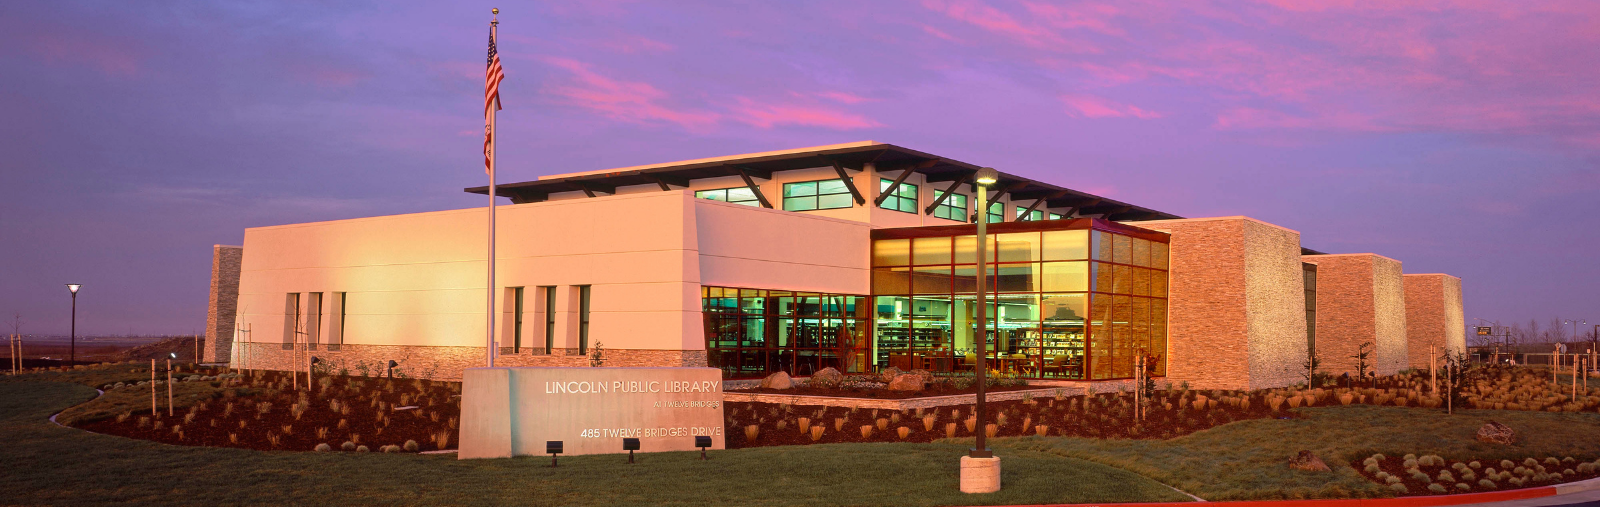 The exterior of the Lincoln Public Library at sunset